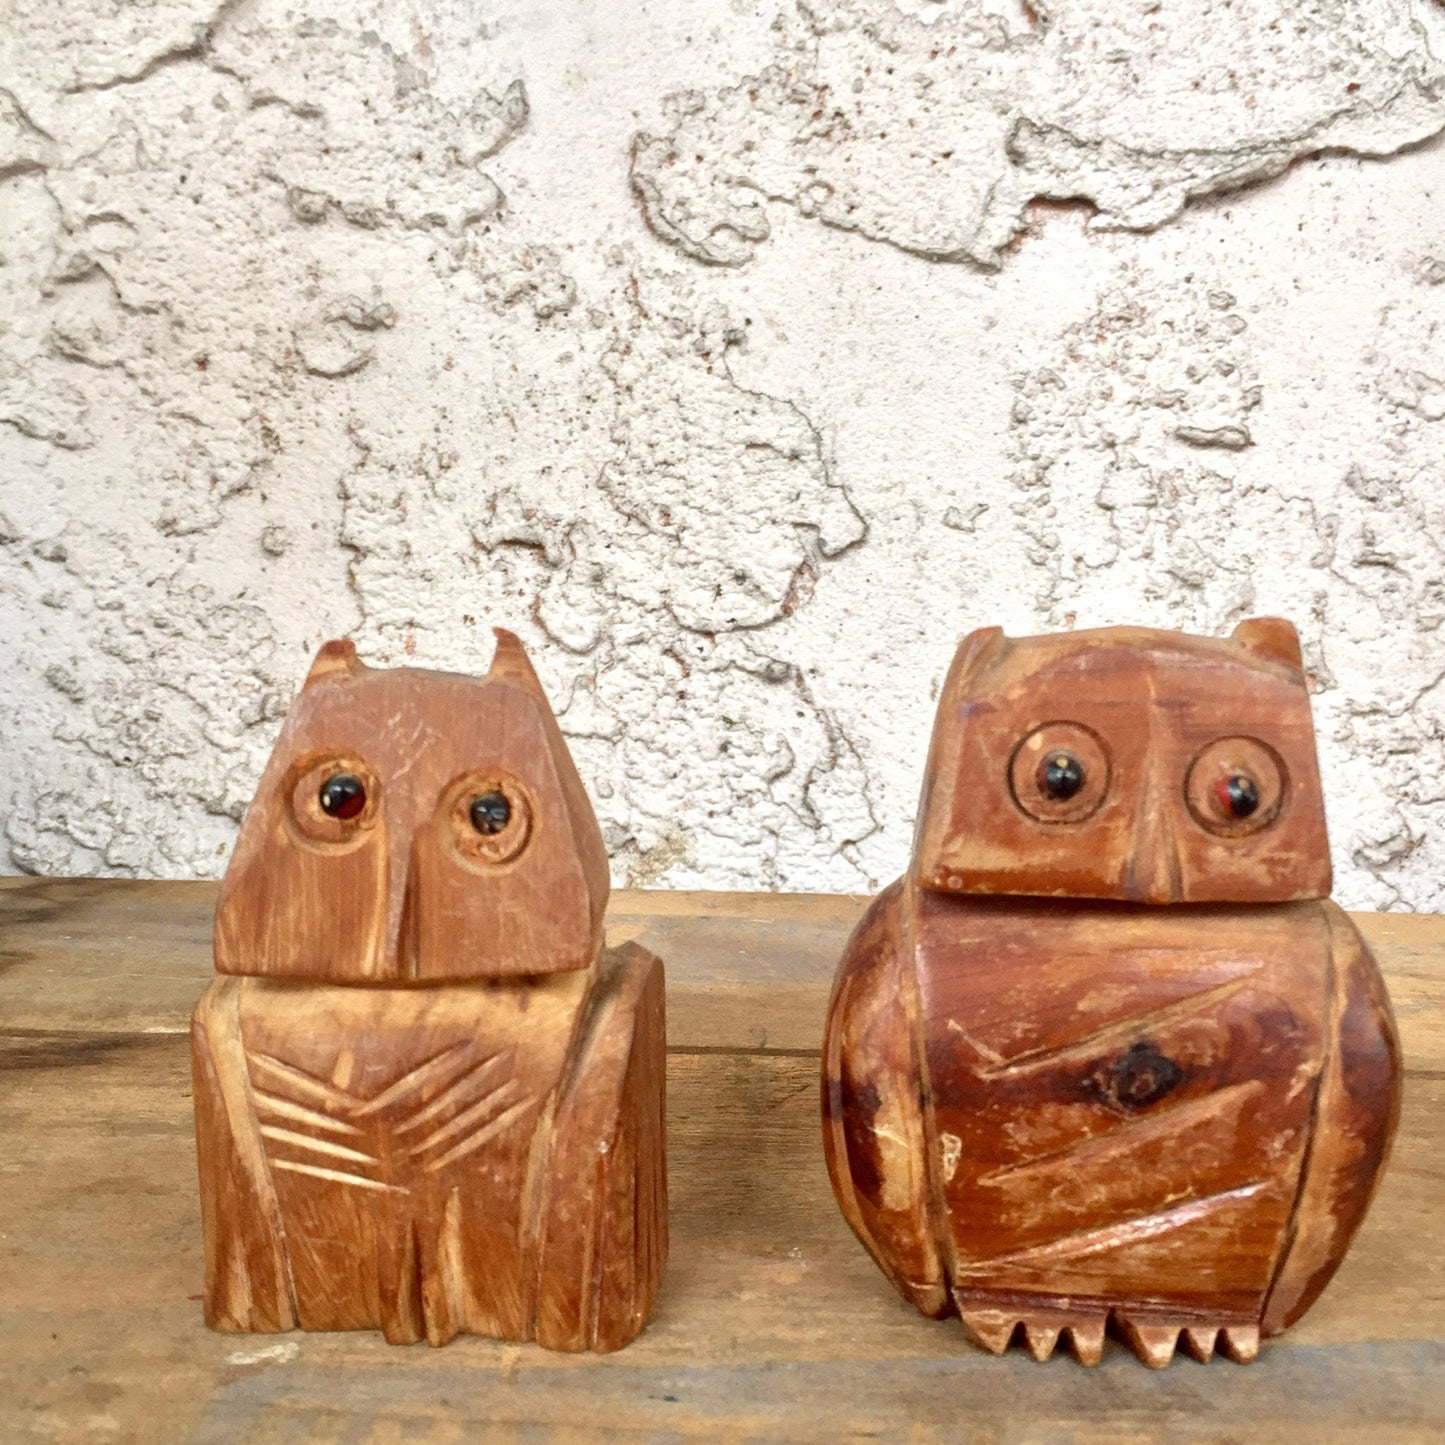 Pair of vintage hand-carved wooden owl figurines, one seated and one standing, with intricate textured details, against a textured white concrete wall background, suitable for use as unique pencil holders or desk organizers.